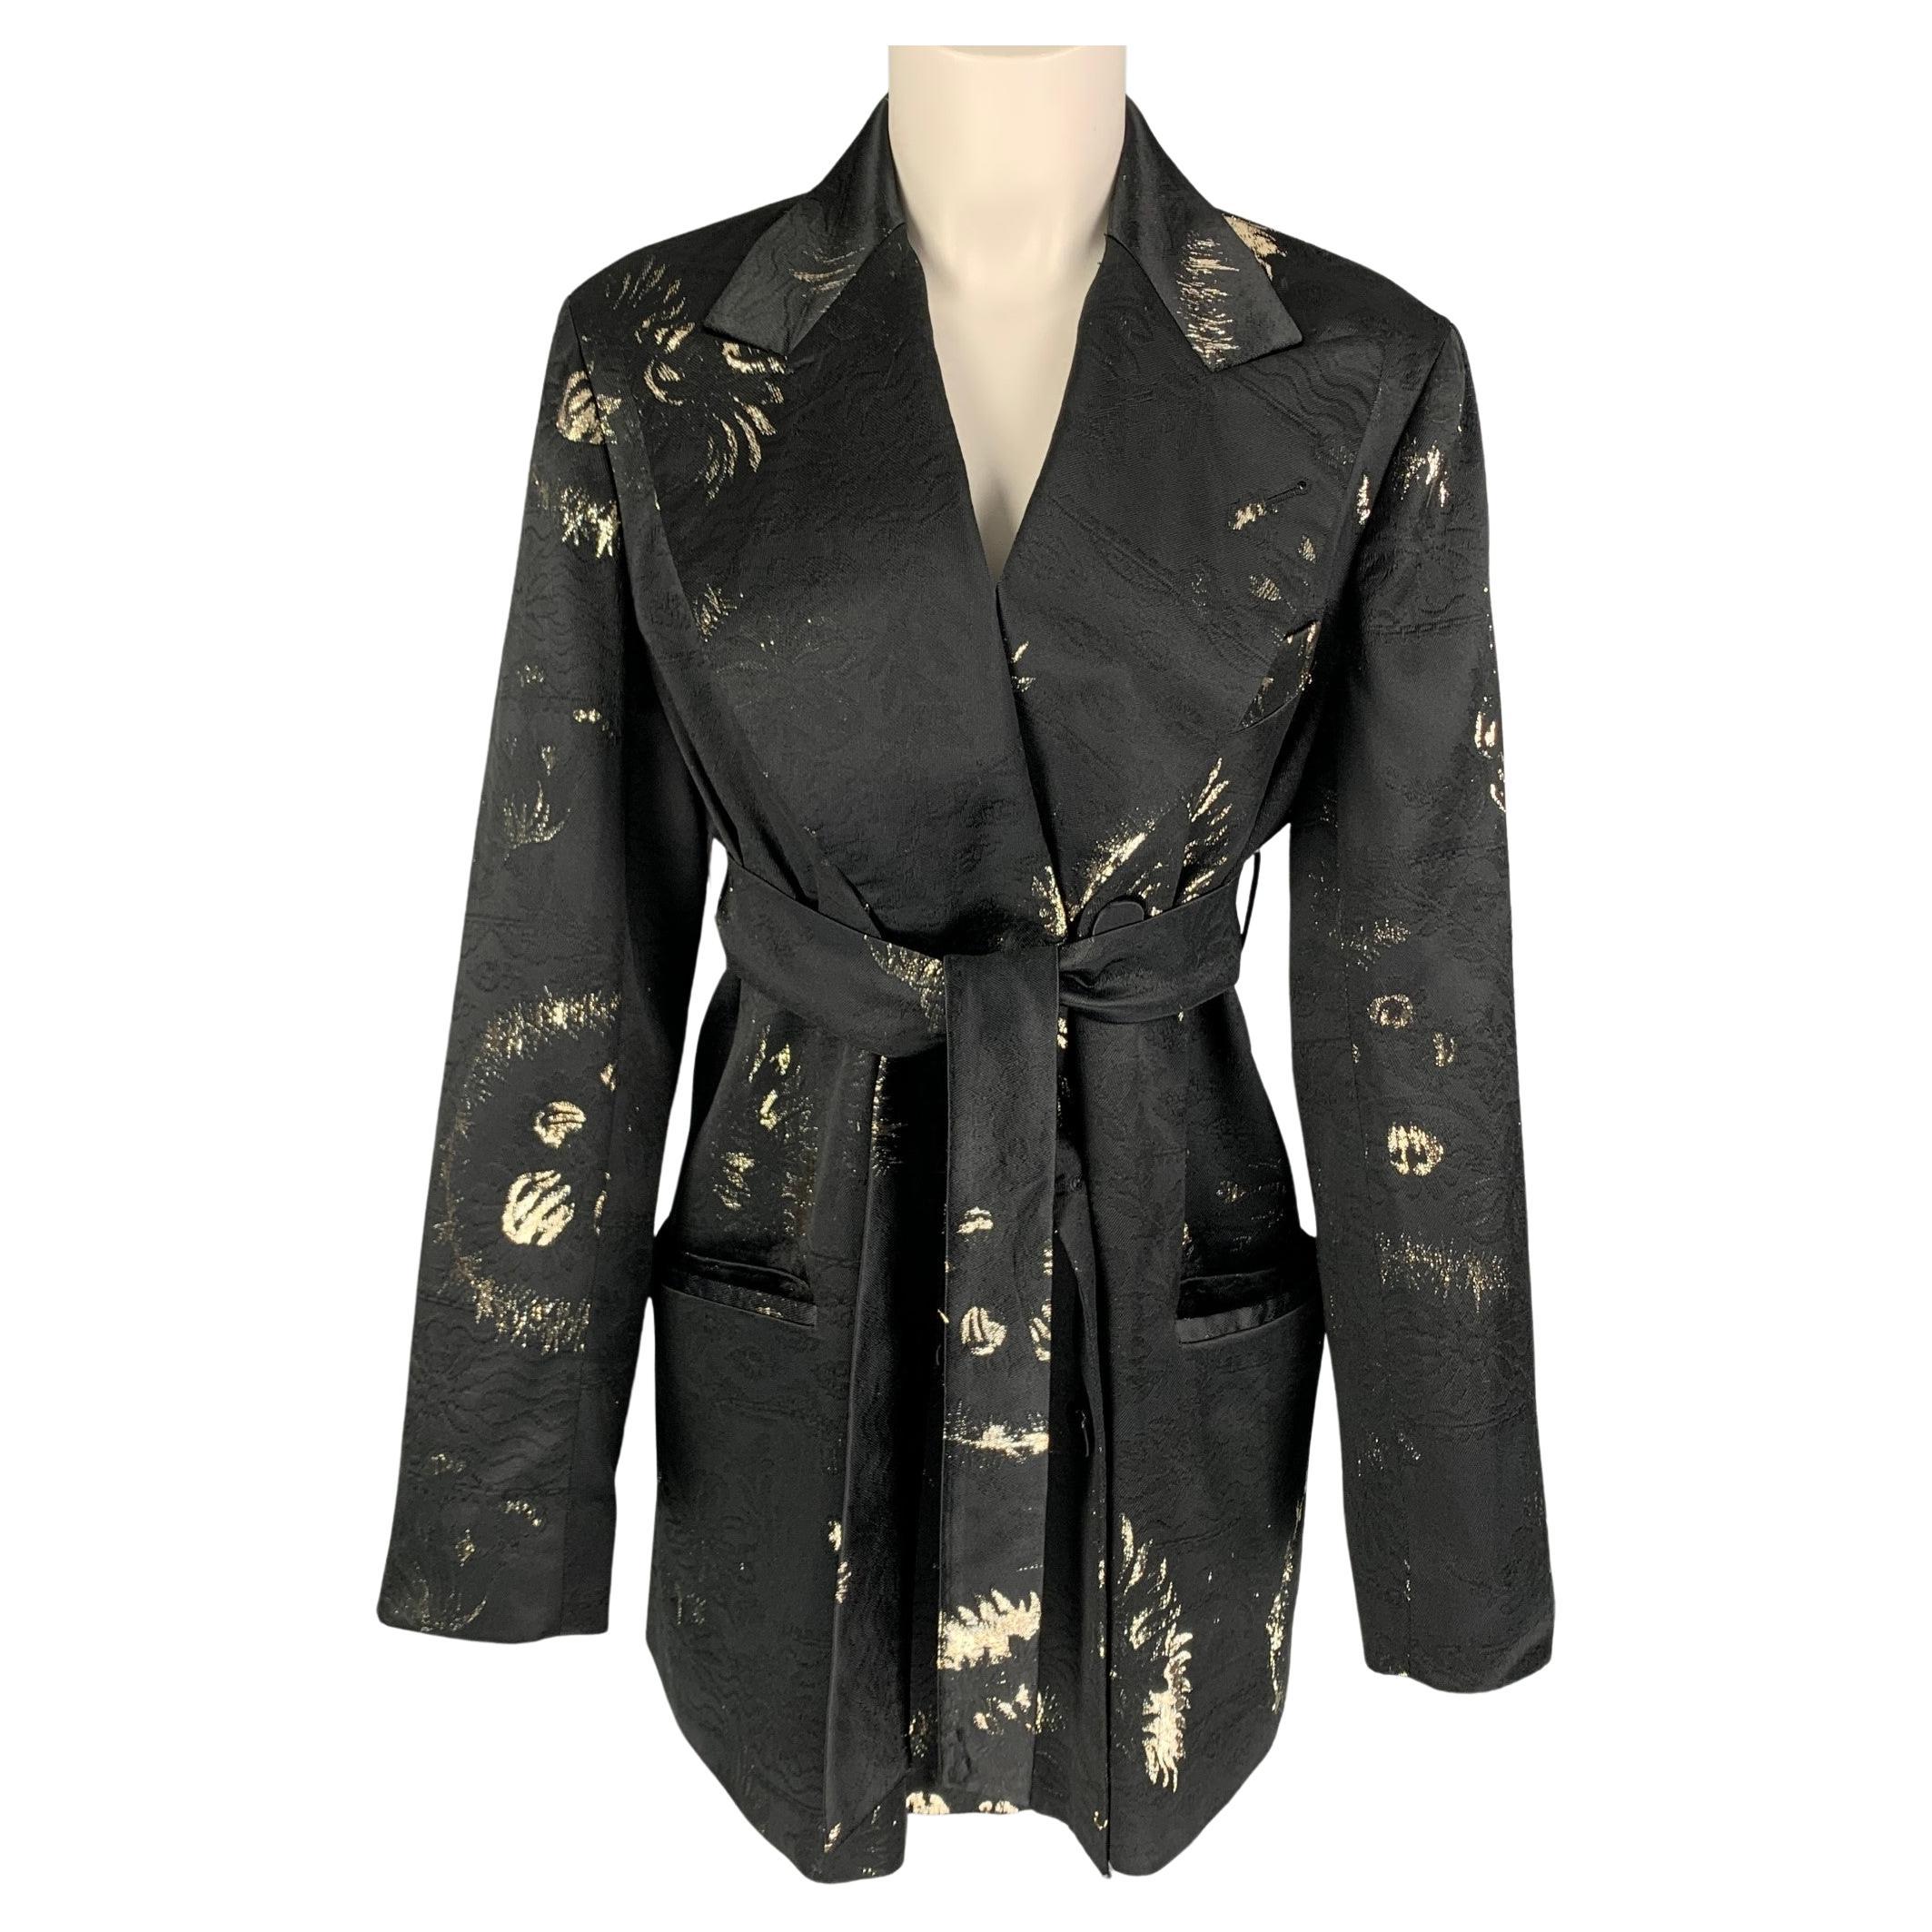 Dries Van Noten: Dresses, Jackets & More - 264 For Sale at 1stdibs 